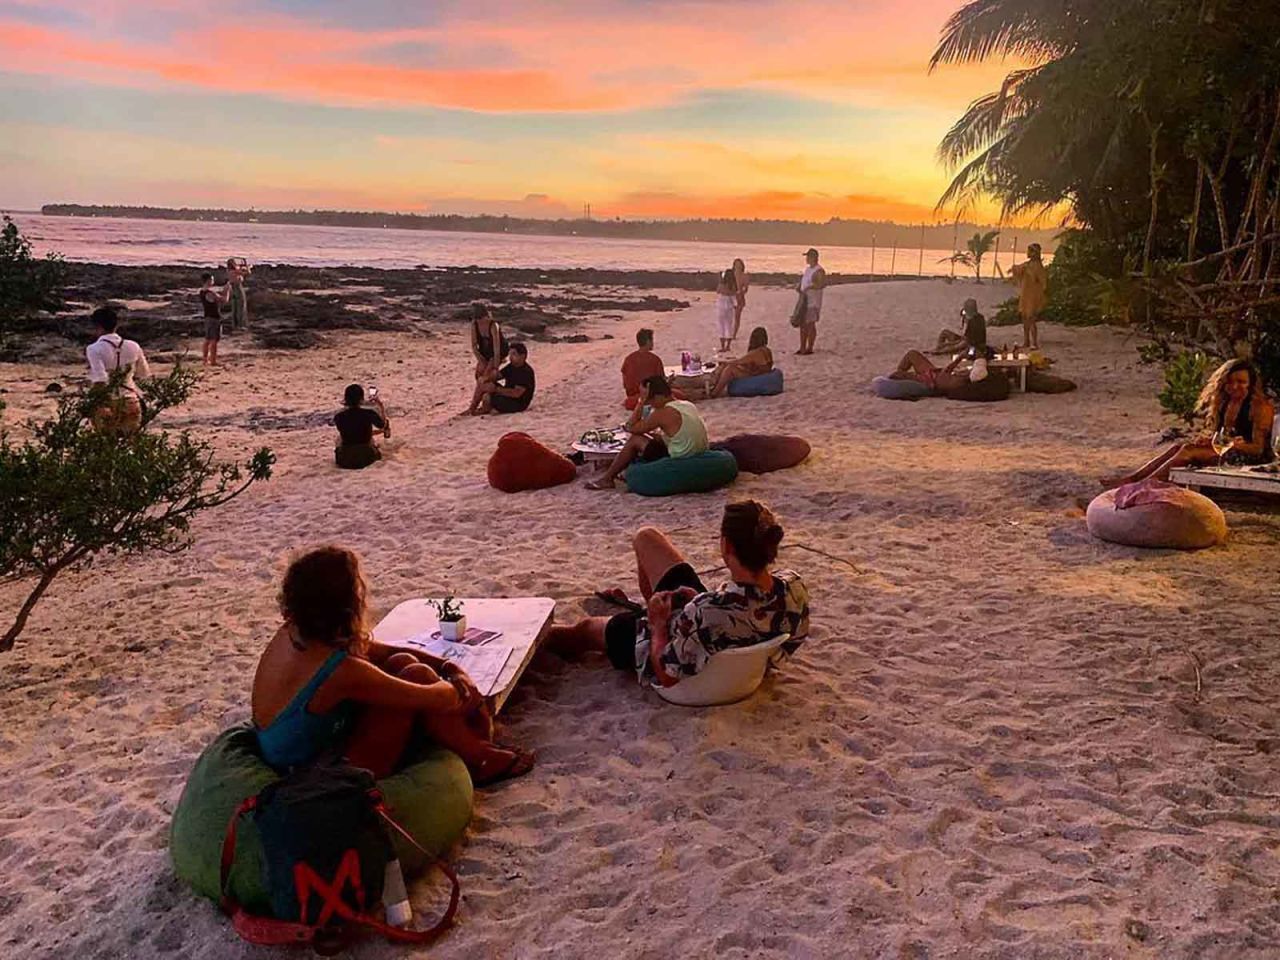 Gianluca Casaccia, manager and co-owner of the White Banana Beach Club in the island of Siargao, criticized Instagram influencers in a viral Facebook post. 